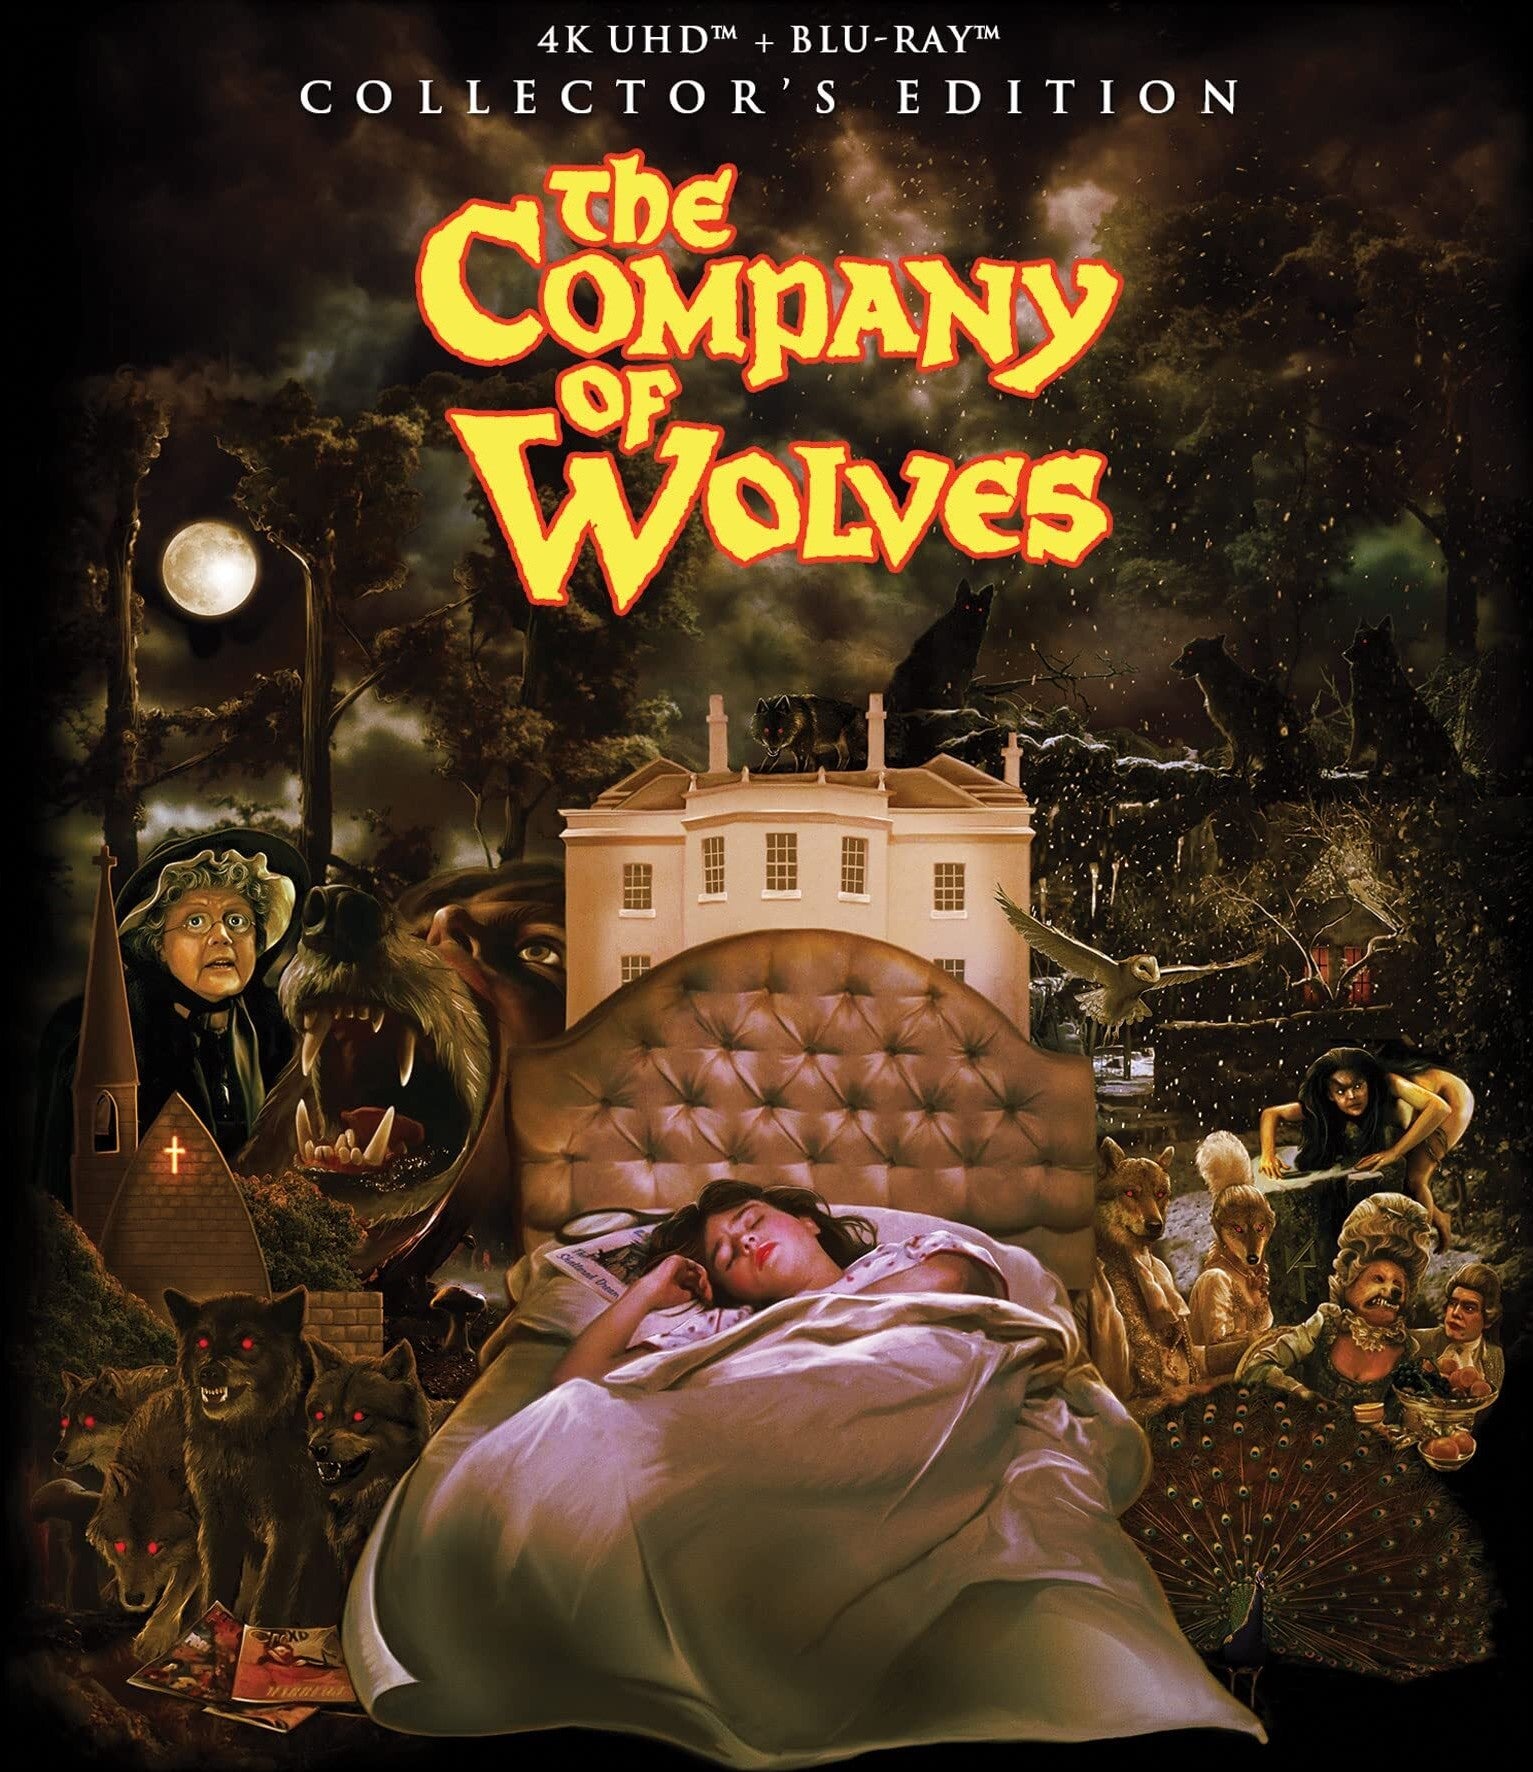 THE COMPANY OF WOLVES (COLLECTOR'S EDITION) 4K UHD/BLU-RAY